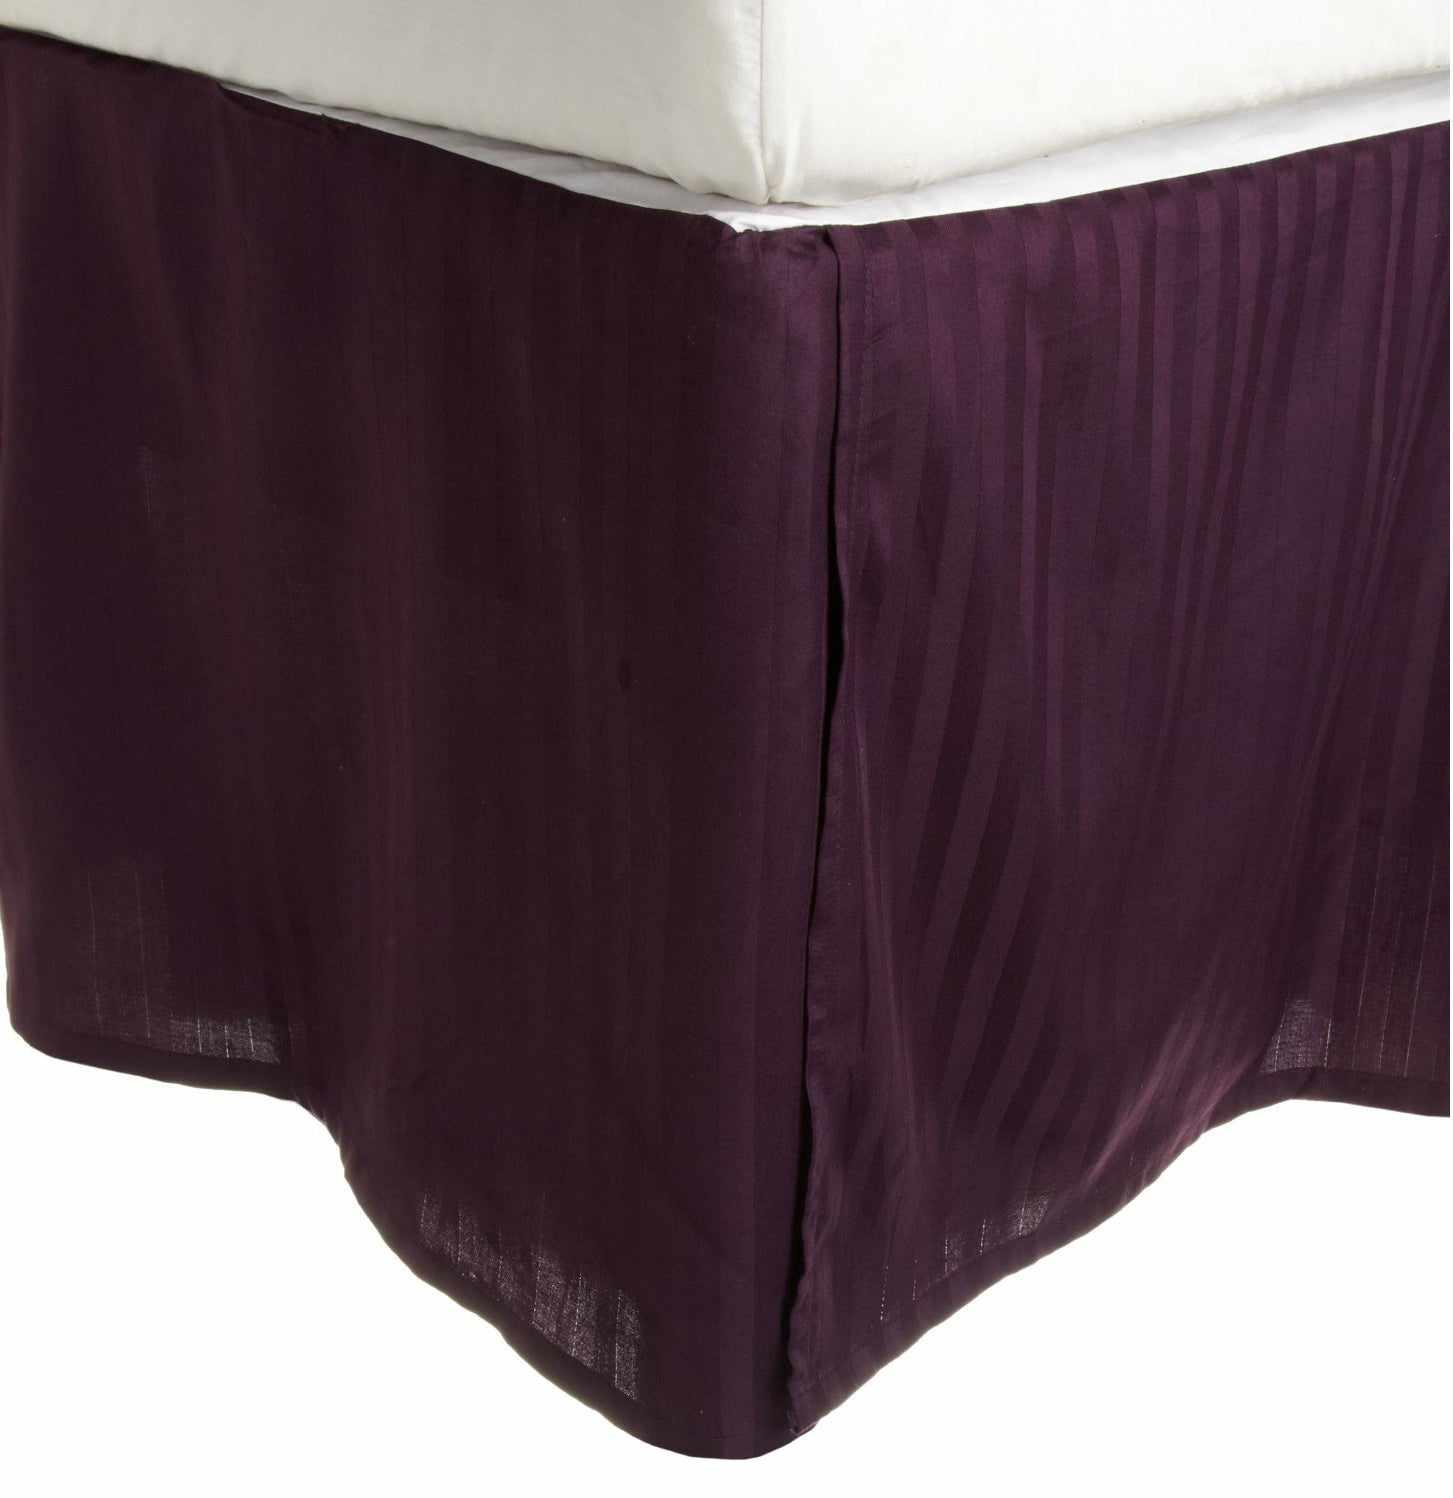 300-Thread Count Egyptian Cotton 15" Drop Striped Bed Skirt - Plum